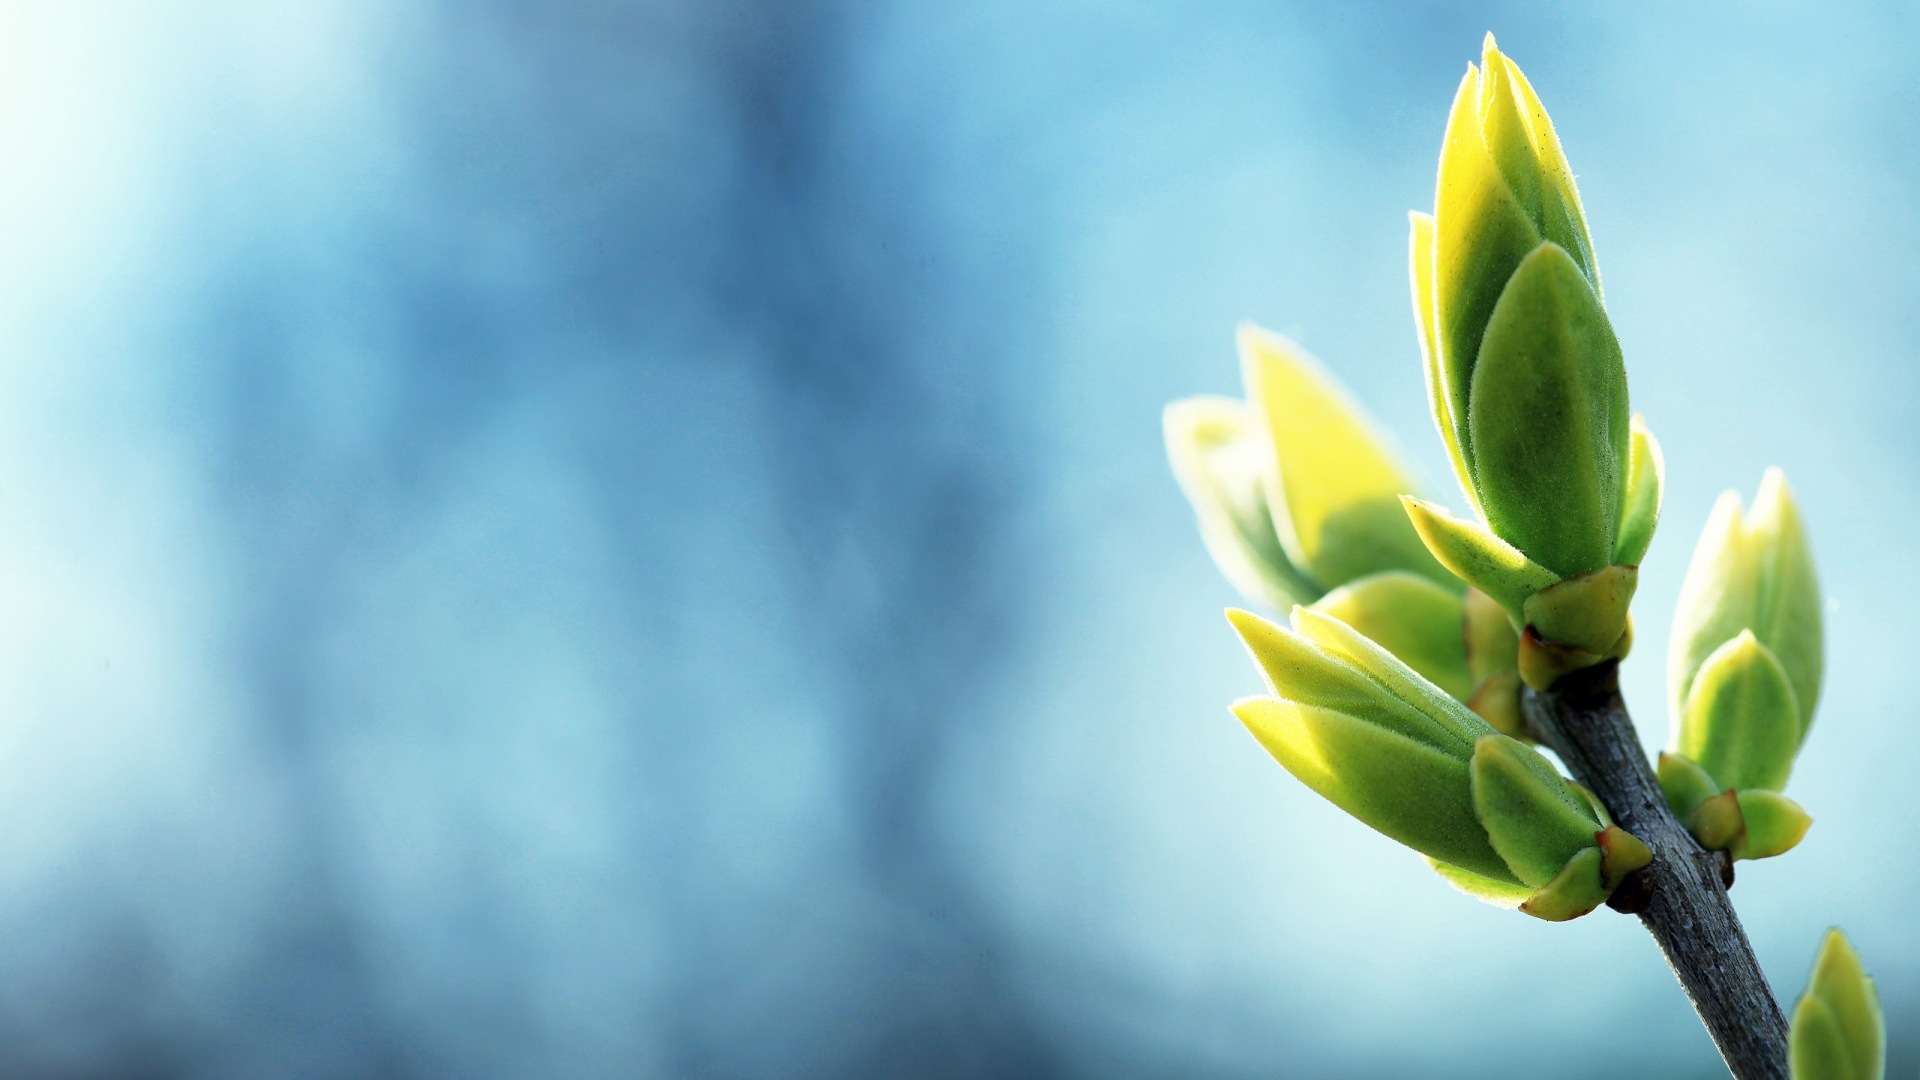 Spring buds on the trees HD wallpapers #10 - 1920x1080